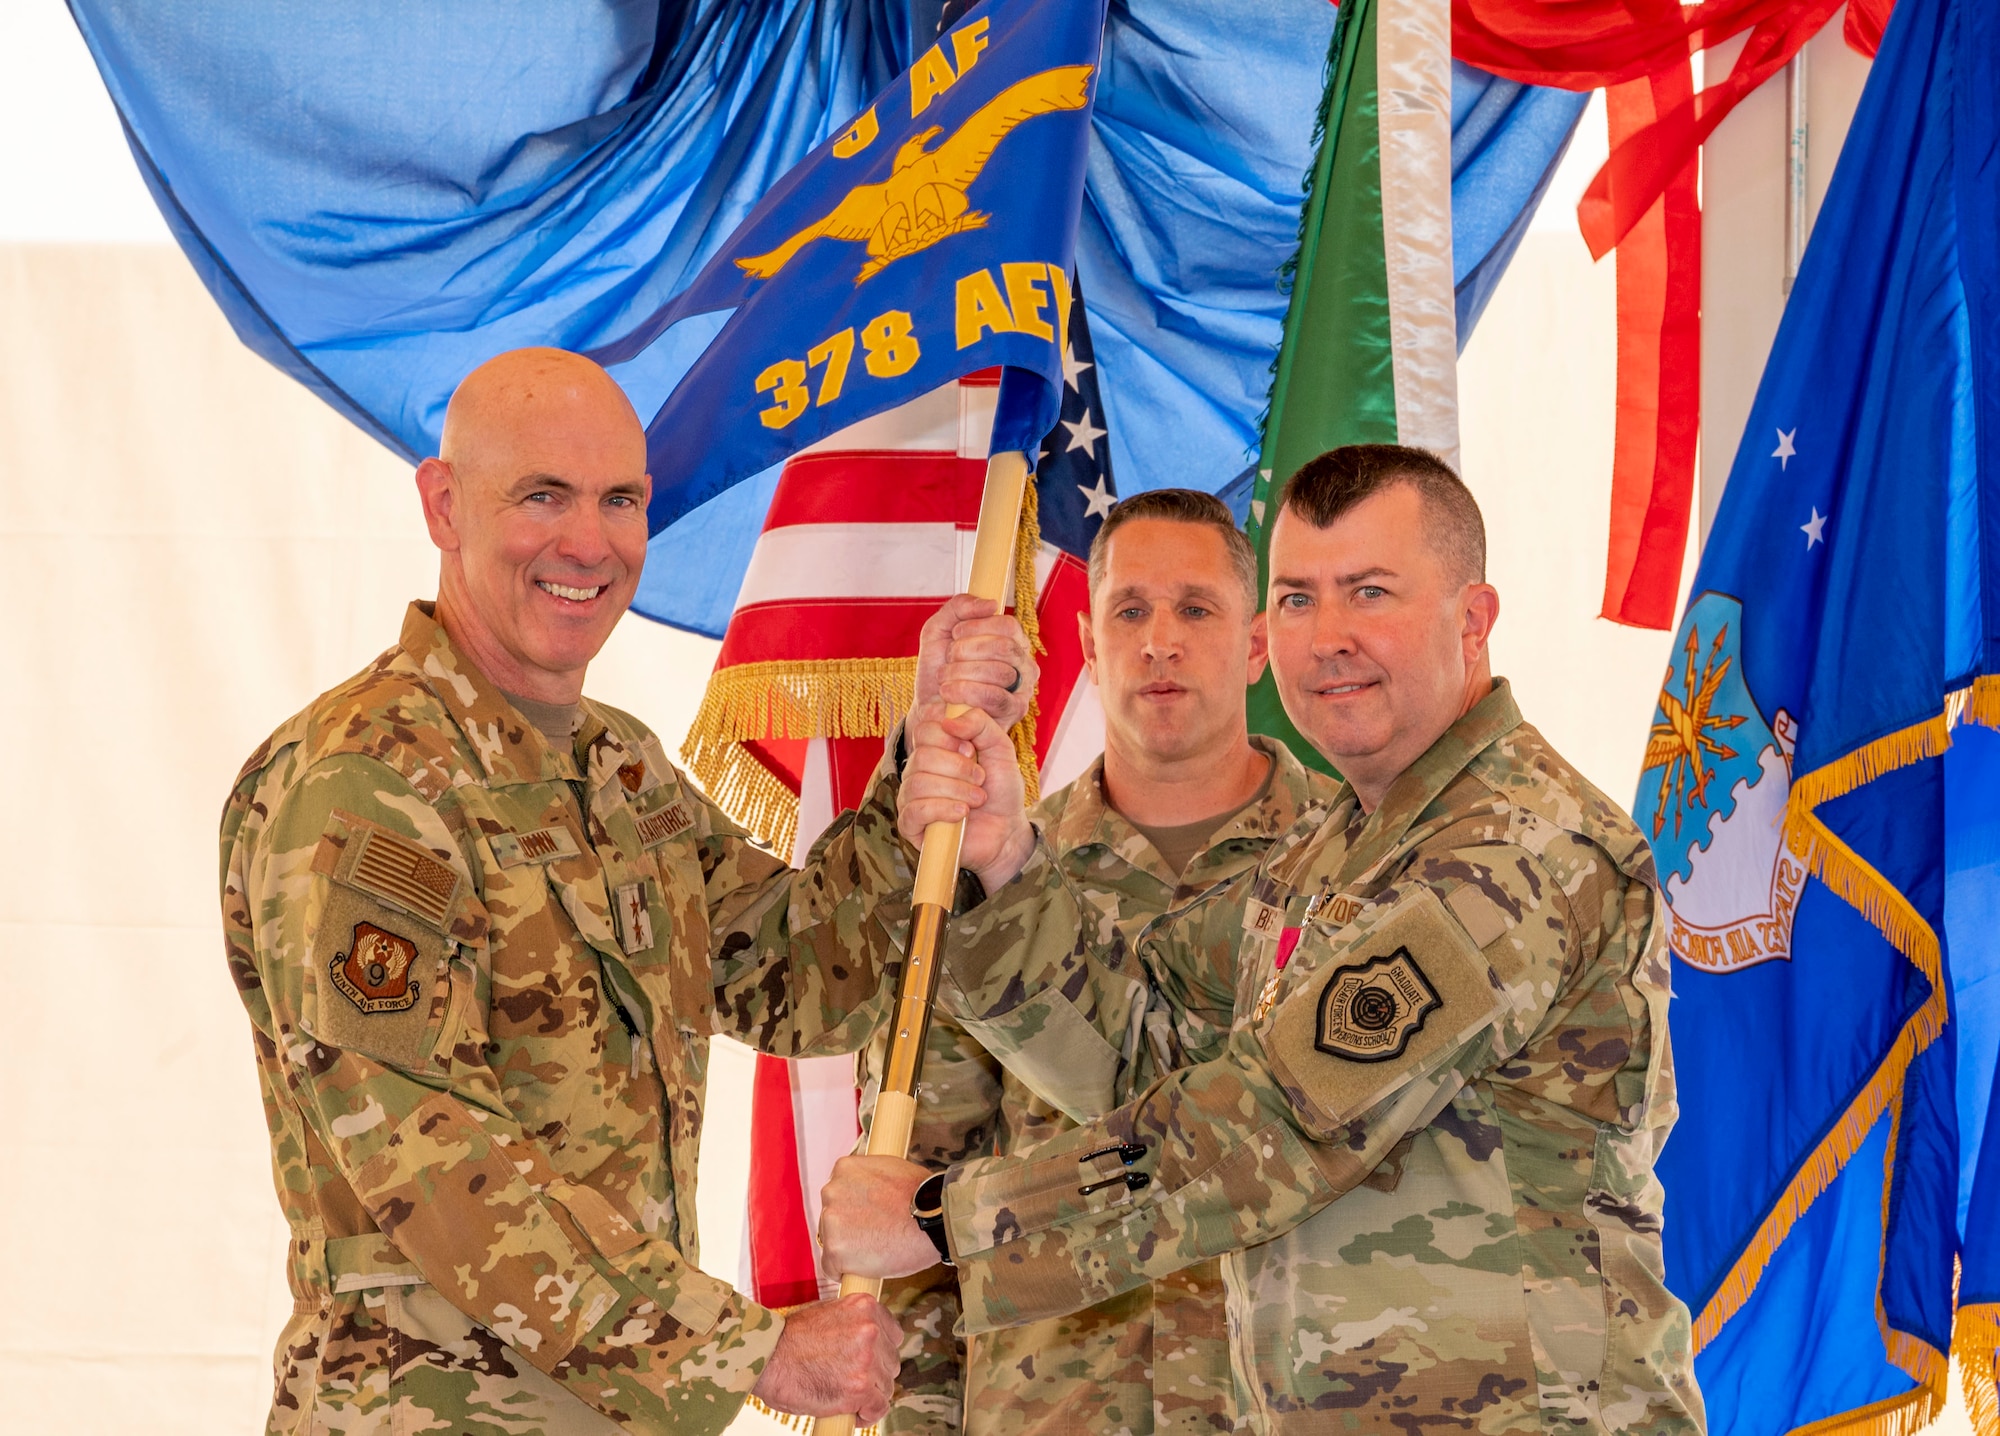 U.S. Air Force Brig. Gen. William Betts, right, outgoing commander of the 378th Air Expeditionary Wing, relinquishes command to Maj. Gen. Clark Quinn, left, Ninth Air Force deputy commander, during a change of command ceremony at Prince Sultan Air Base, Kingdom of Saudi Arabia, May 18, 2023. During the ceremony, Betts relinquished command of the 378th AEW to Brig. Gen. Akshai Gandhi. The tradition of change of command ceremonies are to allow service members to witness their new leader assume the responsibility and trust associated with the position of commander. (U.S. Air Force photo by Senior Airman Stephani Barge)